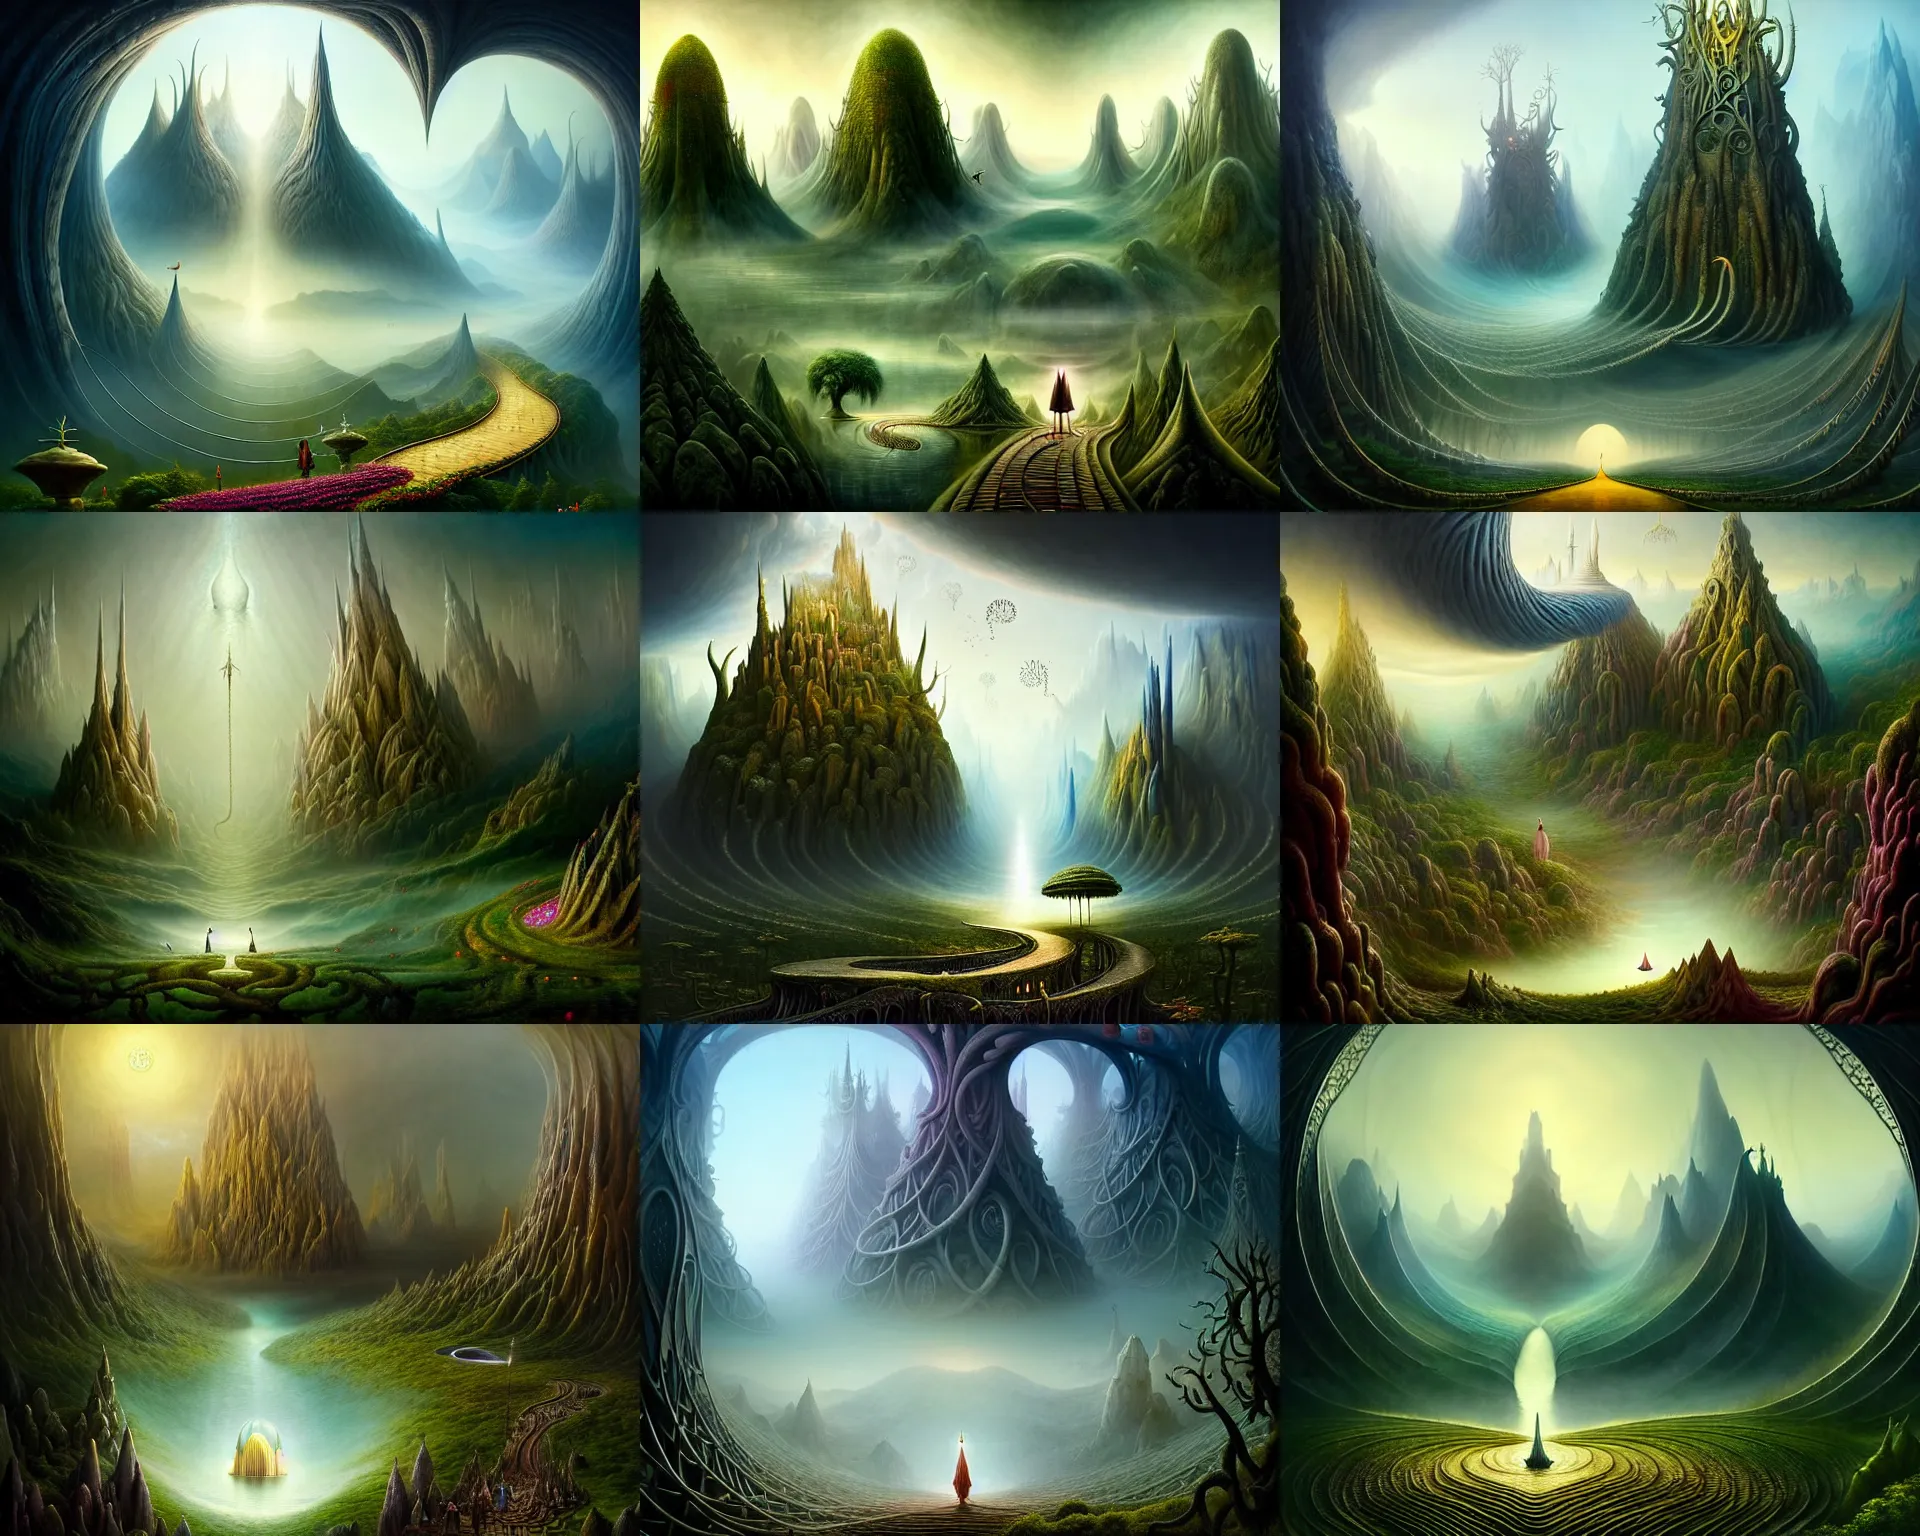 Prompt: a beguiling epic stunning beautiful and insanely detailed matte painting of the impossible winding path through the land of the elder elvish gods with surreal architecture designed by Heironymous Bosch, mega structures inspired by Heironymous Bosch's Garden of Earthly Delights, vast surreal landscape and horizon by Asher Durand and Cyril Rolando and Natalie Shau, masterpiece!!!, grand!, imaginative!!!, whimsical!!, epic scale, intricate details, sense of awe, elite, wonder, insanely complex, masterful composition!!!, sharp focus, fantasy realism, dramatic lighting